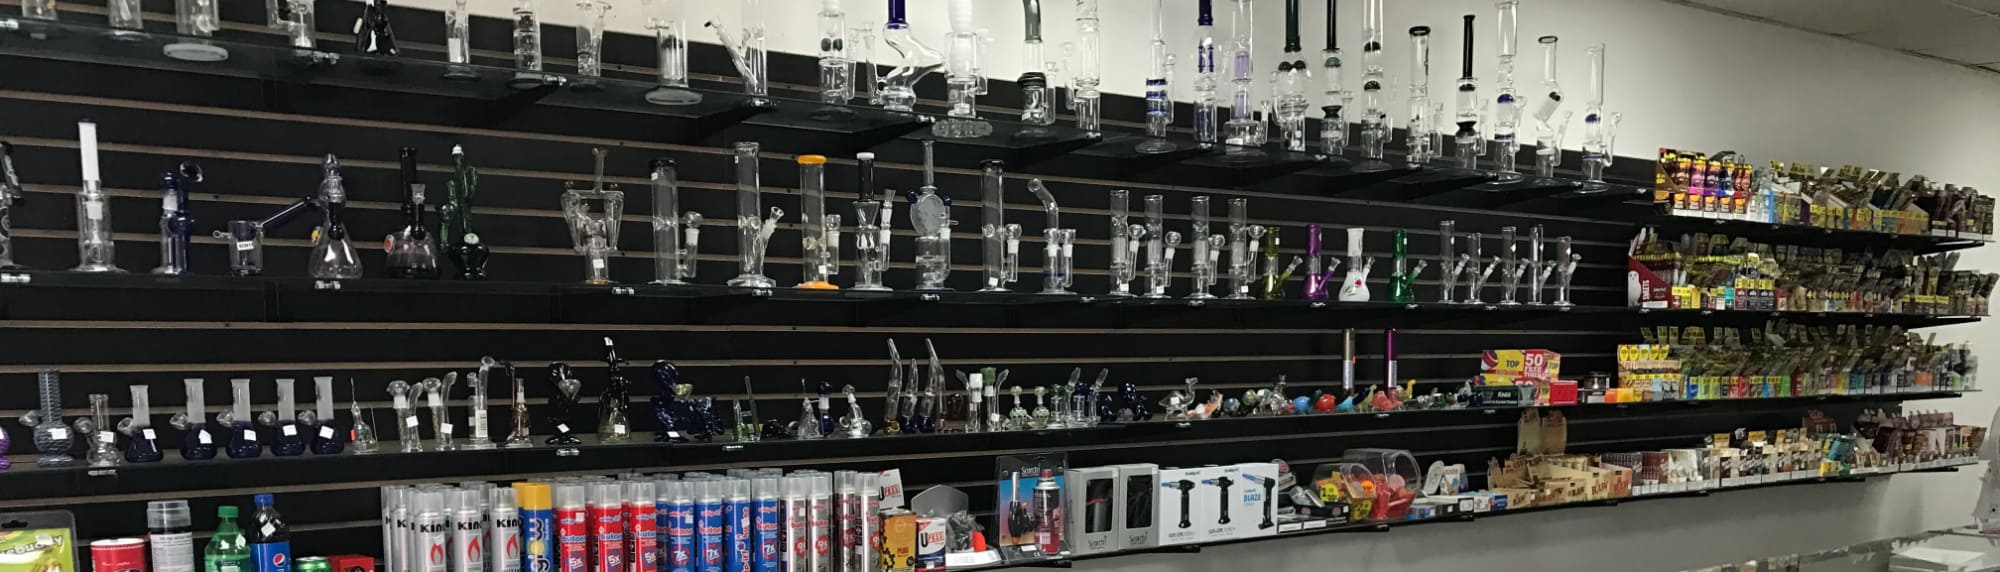 image of the smoke shop where you can buy kratom in jackson tennessee